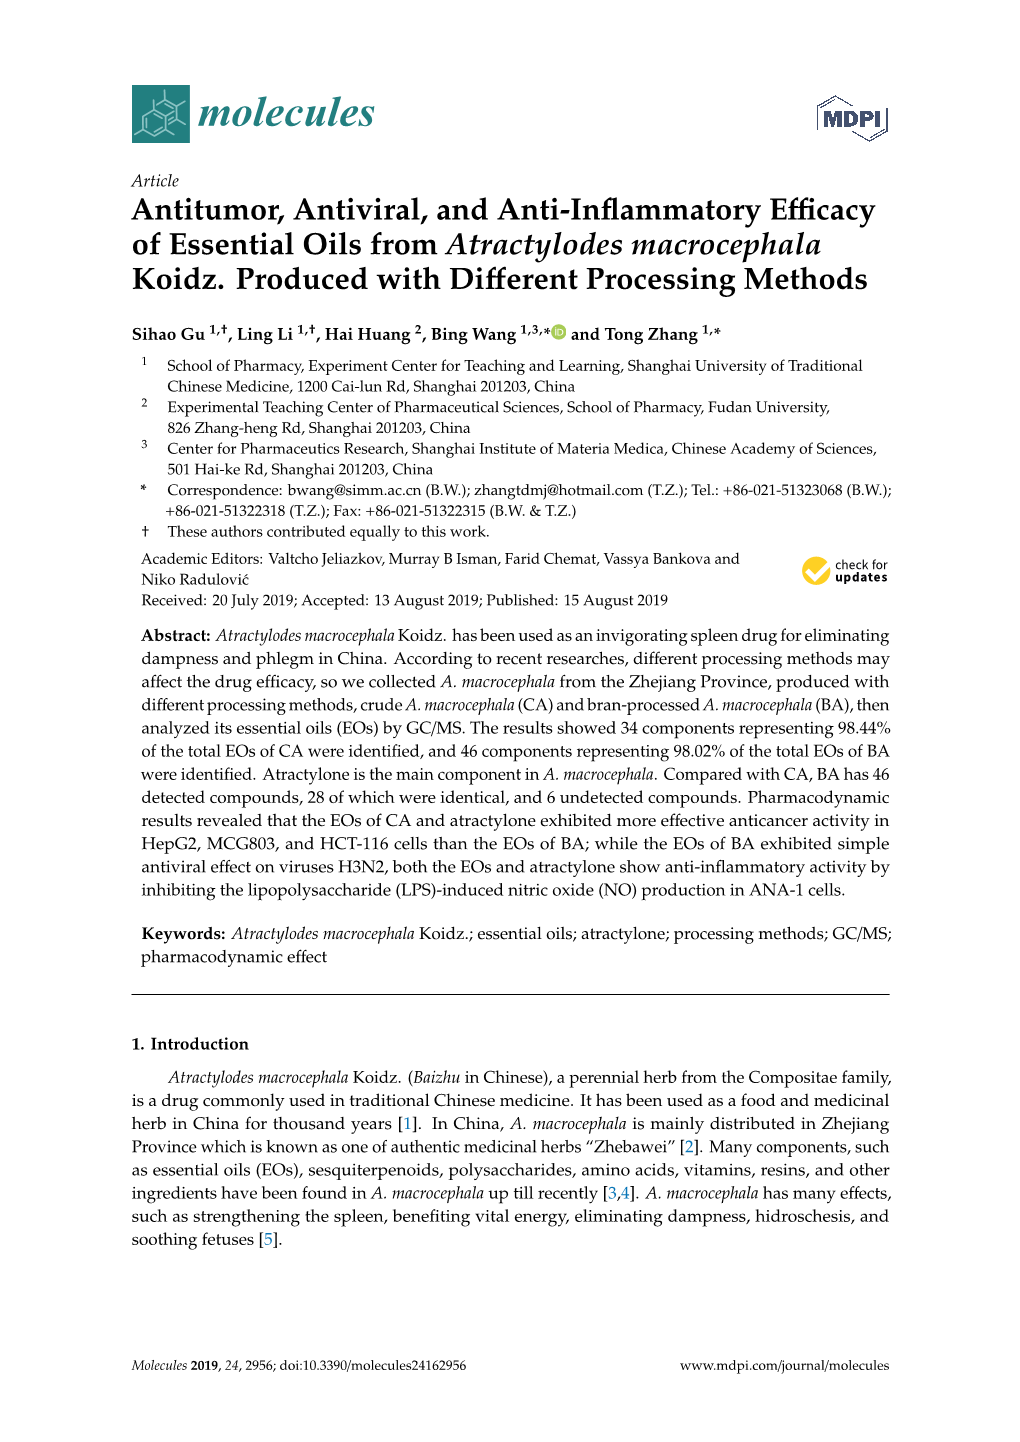 Antitumor, Antiviral, and Anti-Inflammatory Efficacy of Essential Oils from Atractylodes Macrocephala Koidz. Produced with Diffe